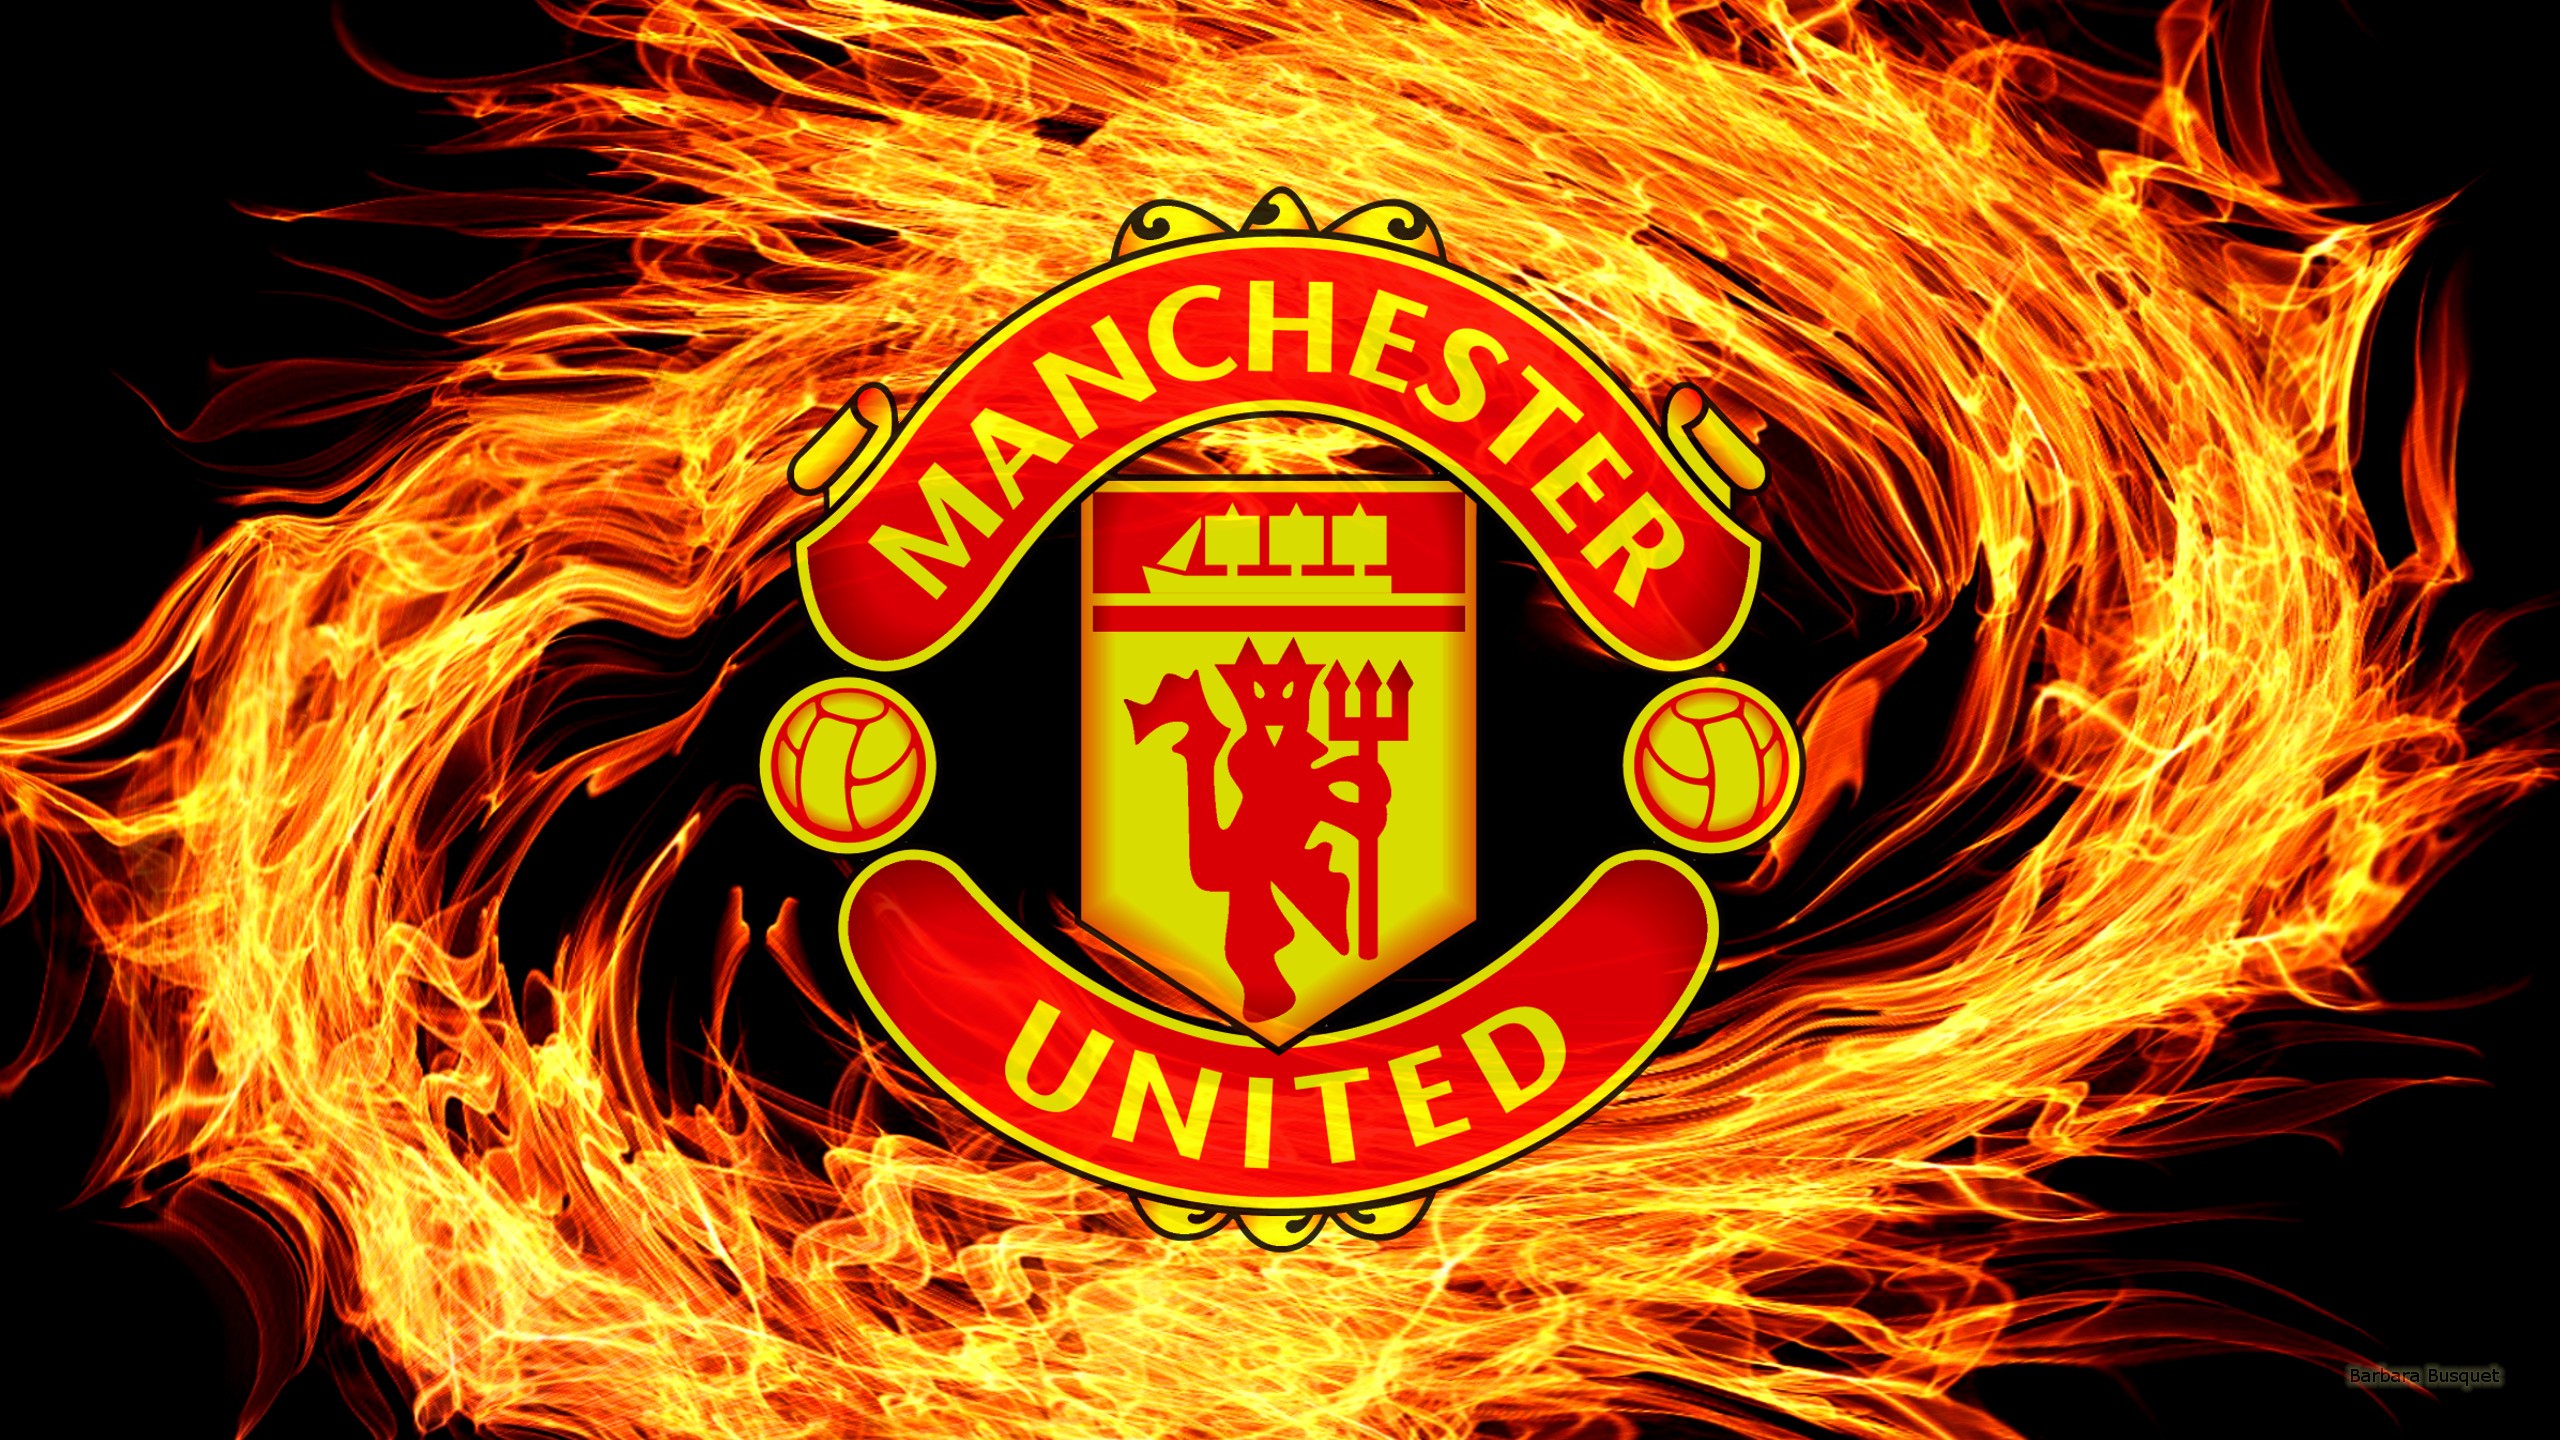 Manchester United wallpaper ·① Download free cool full HD wallpapers